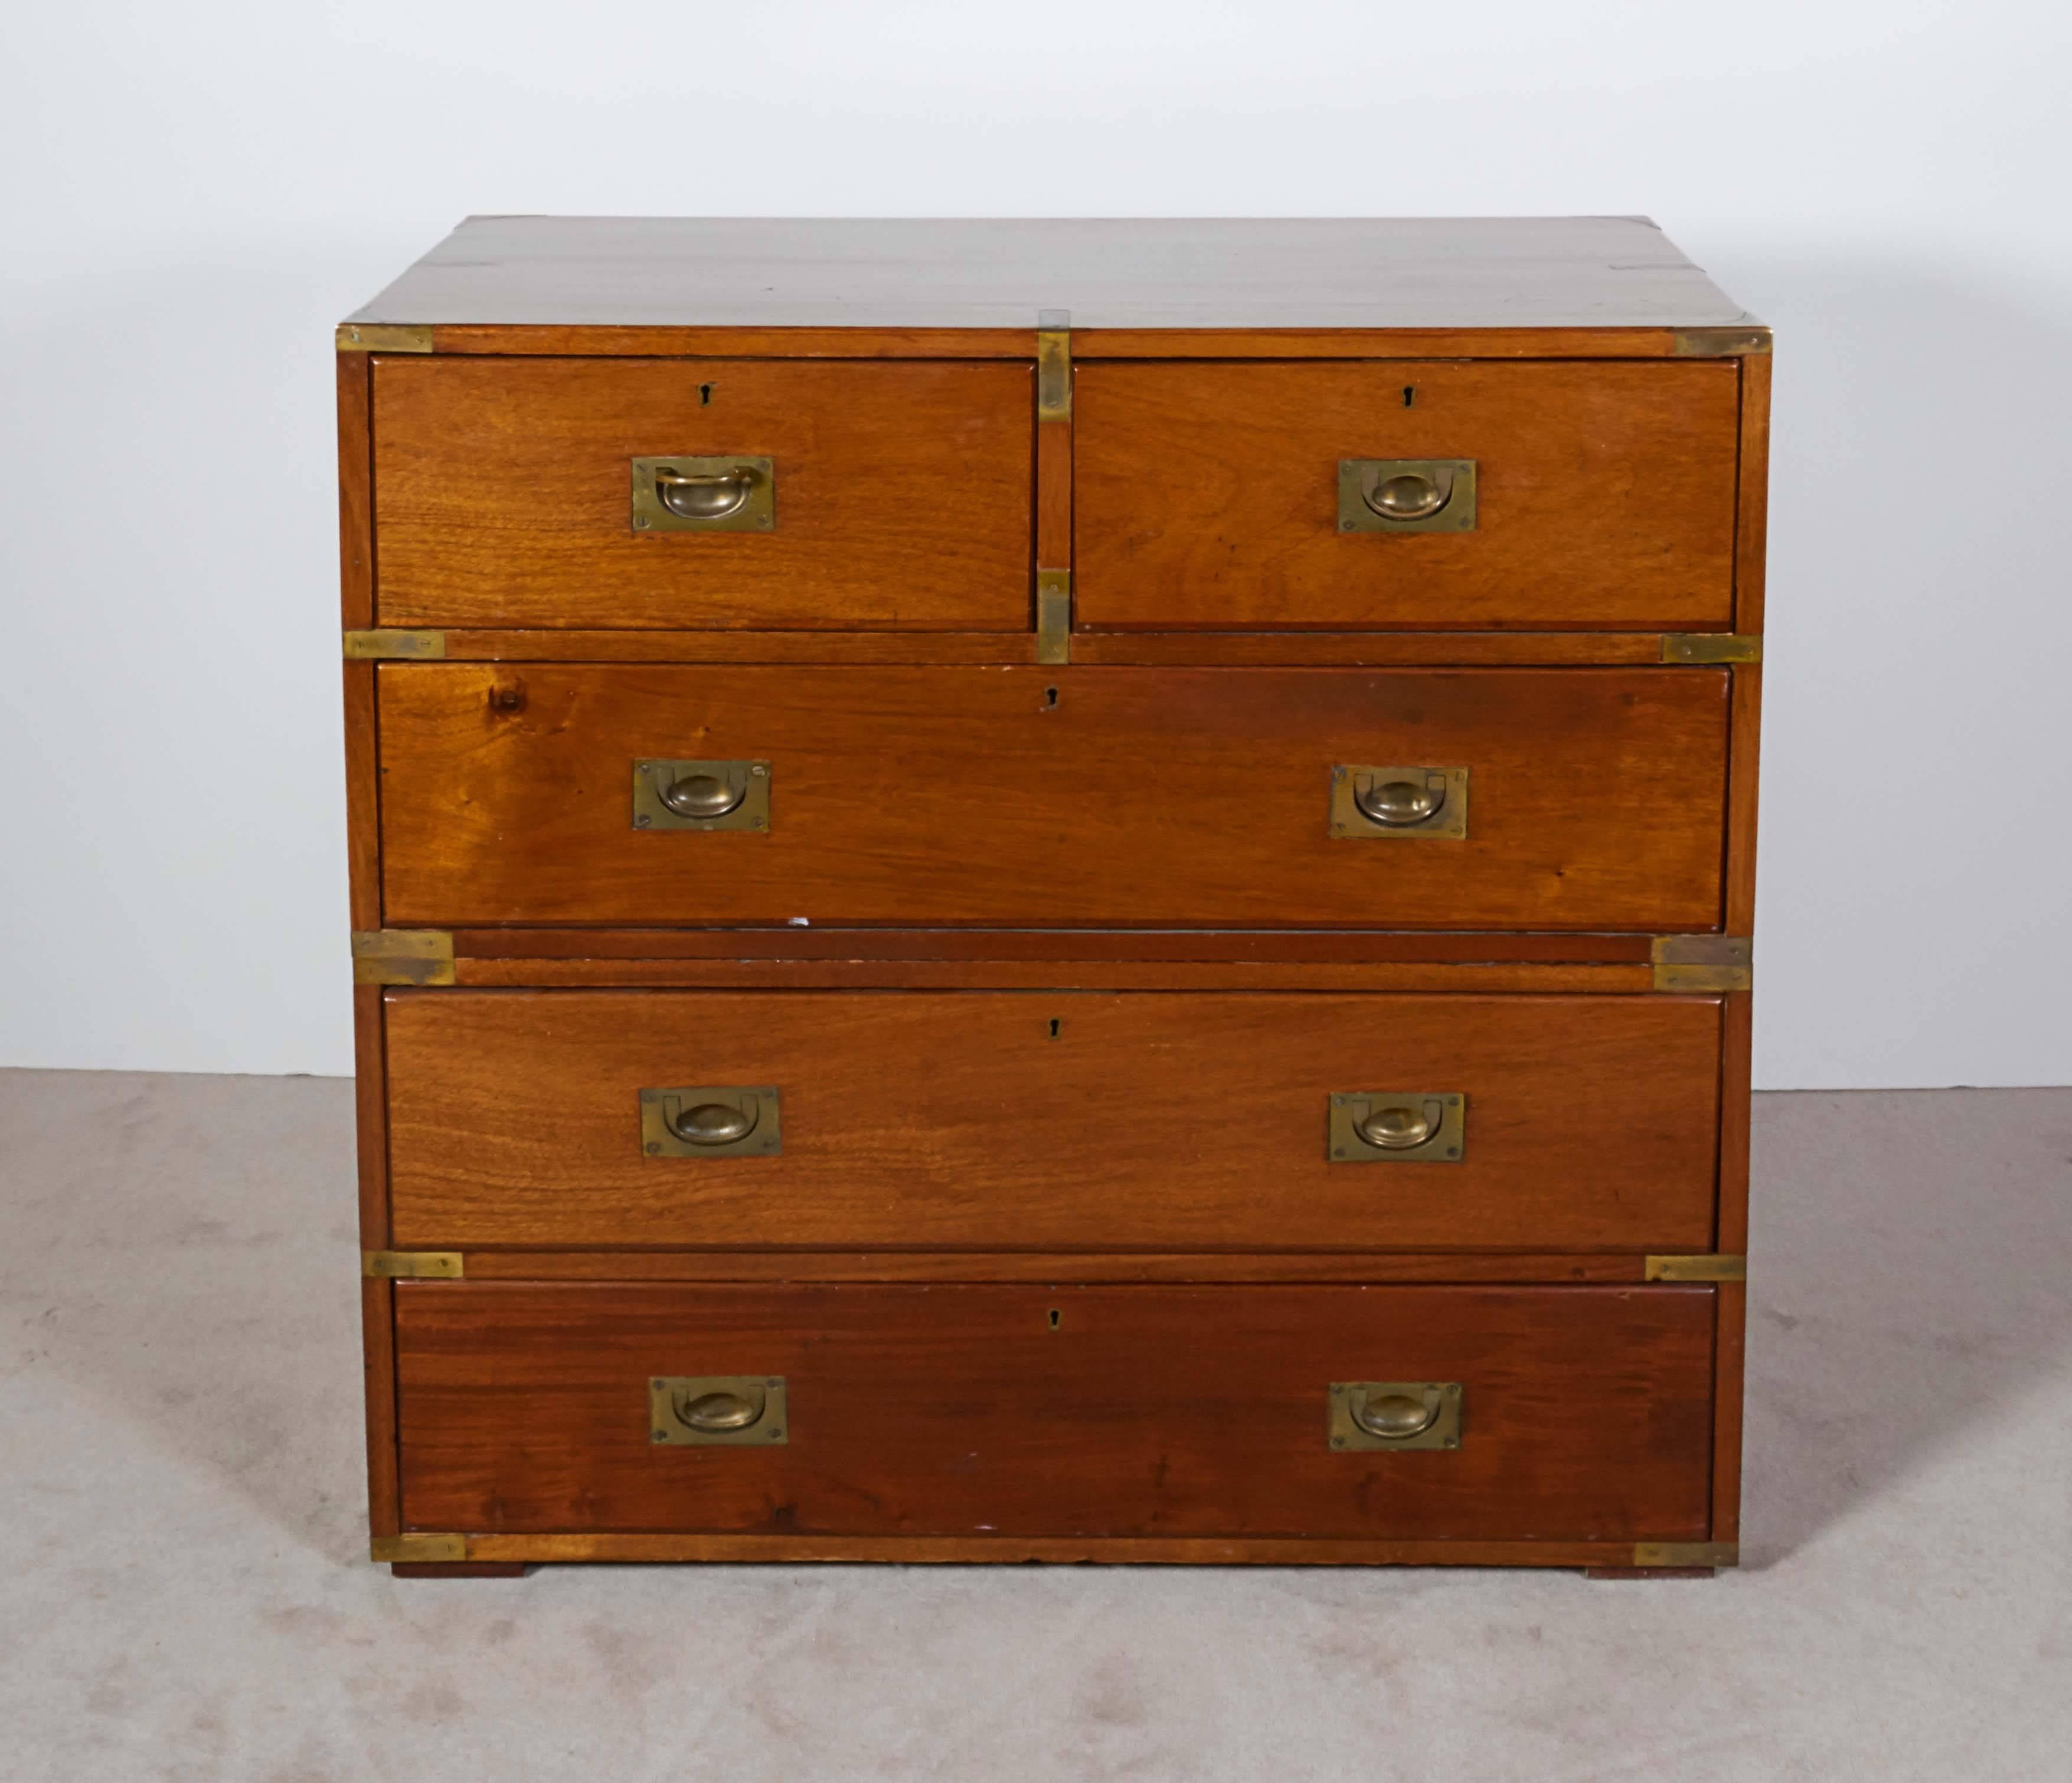 A pair of Victorian era American Campaign chests, manufactured circa 1860s, identical and handcrafted of mahogany with dovetail joinery, each with two short and three long drawers, accented with brass to pull handles and corners. Very good antique